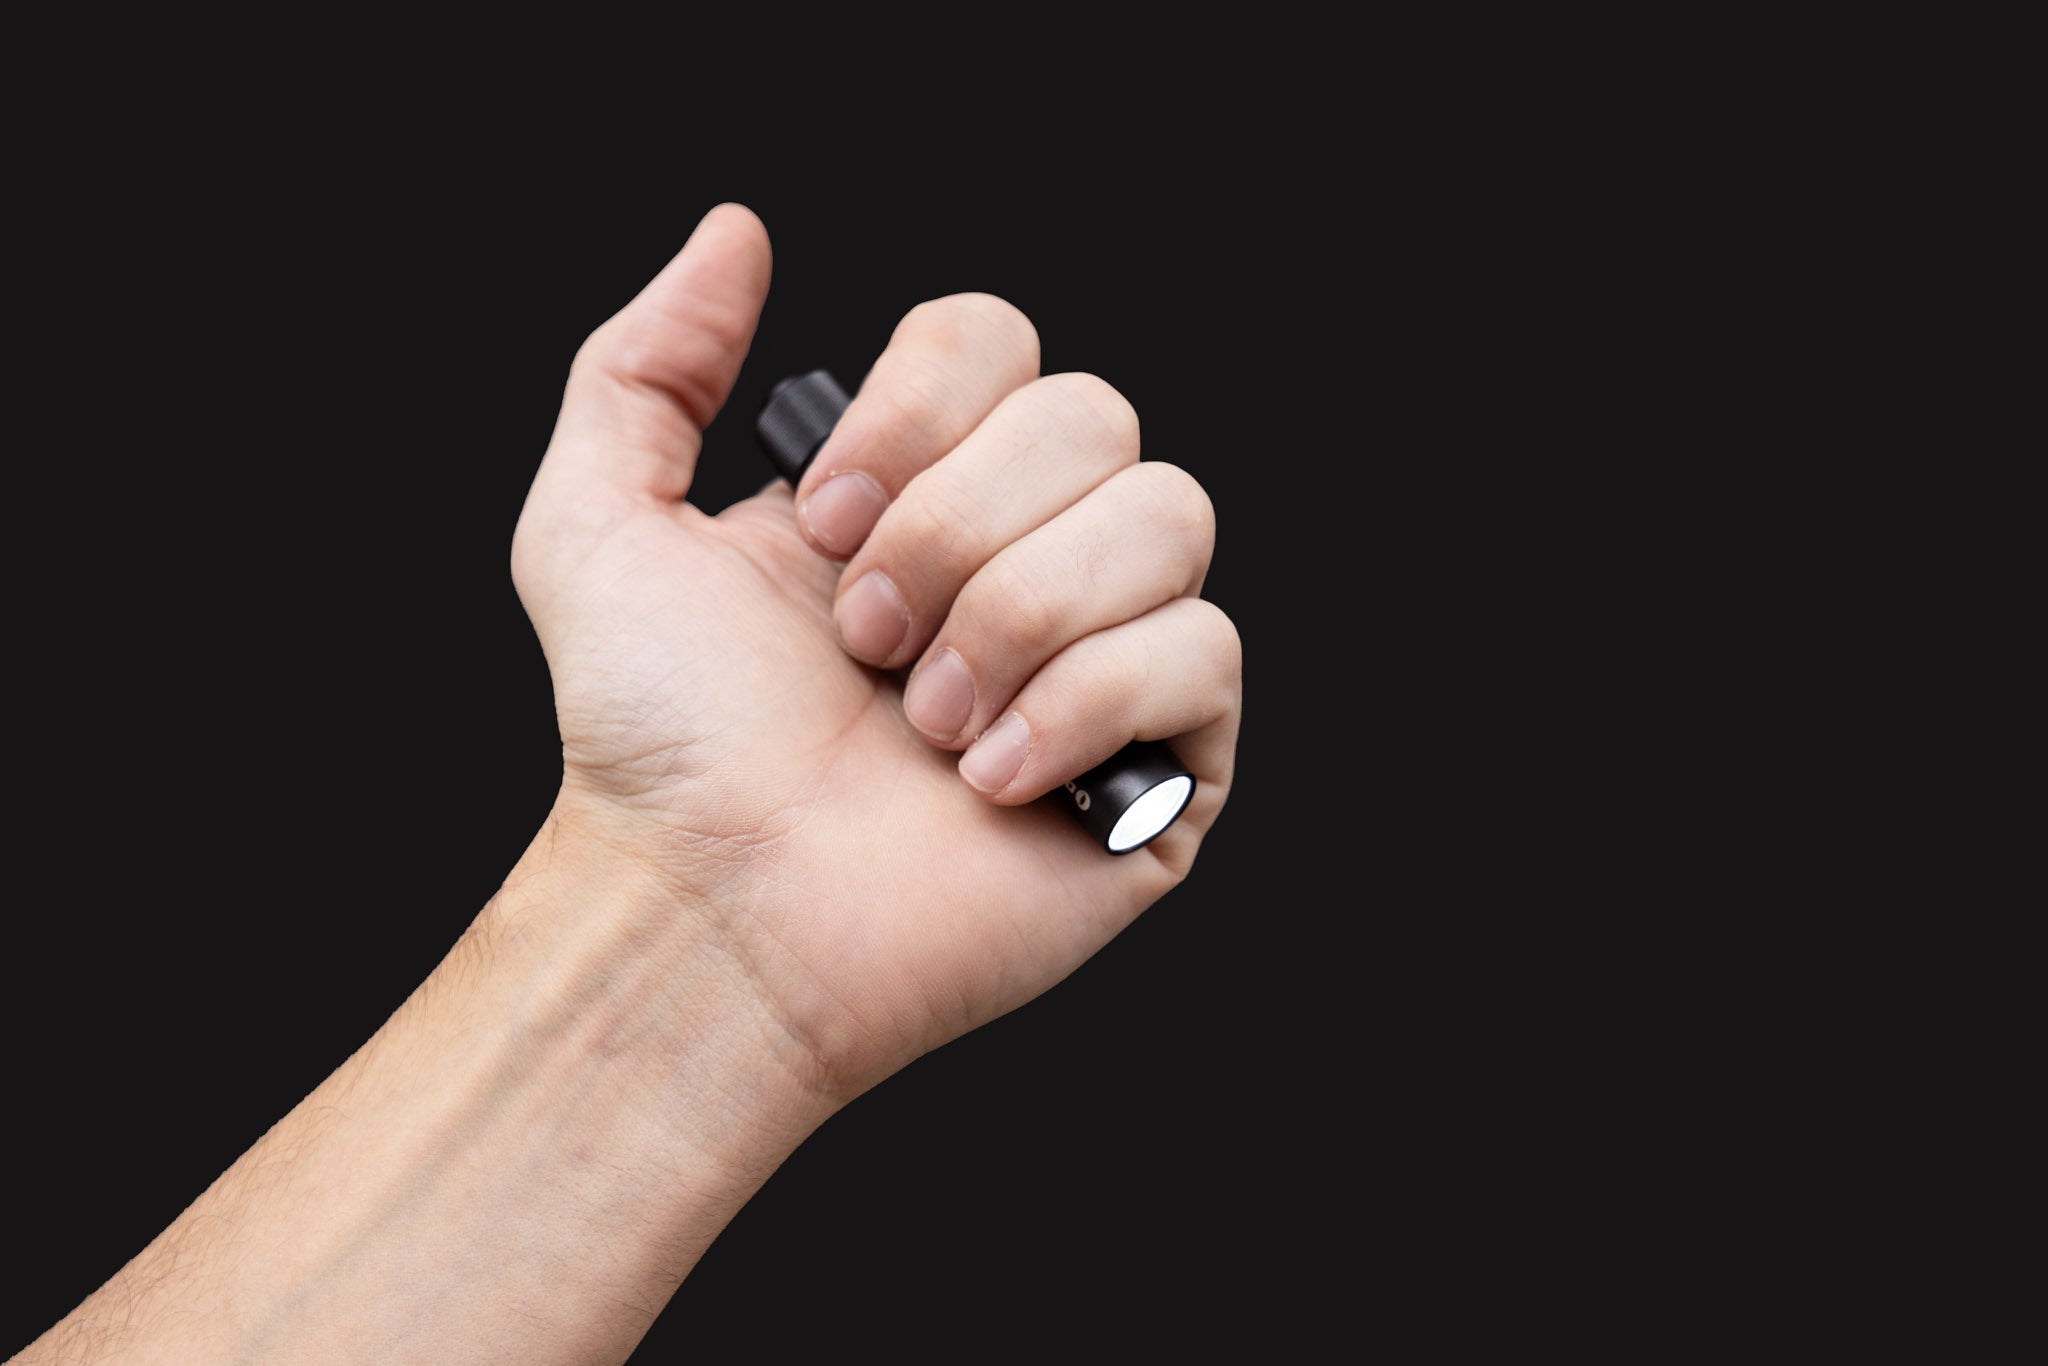 WAVE BY GENKI INSTRUMENTS - Smart Ring News